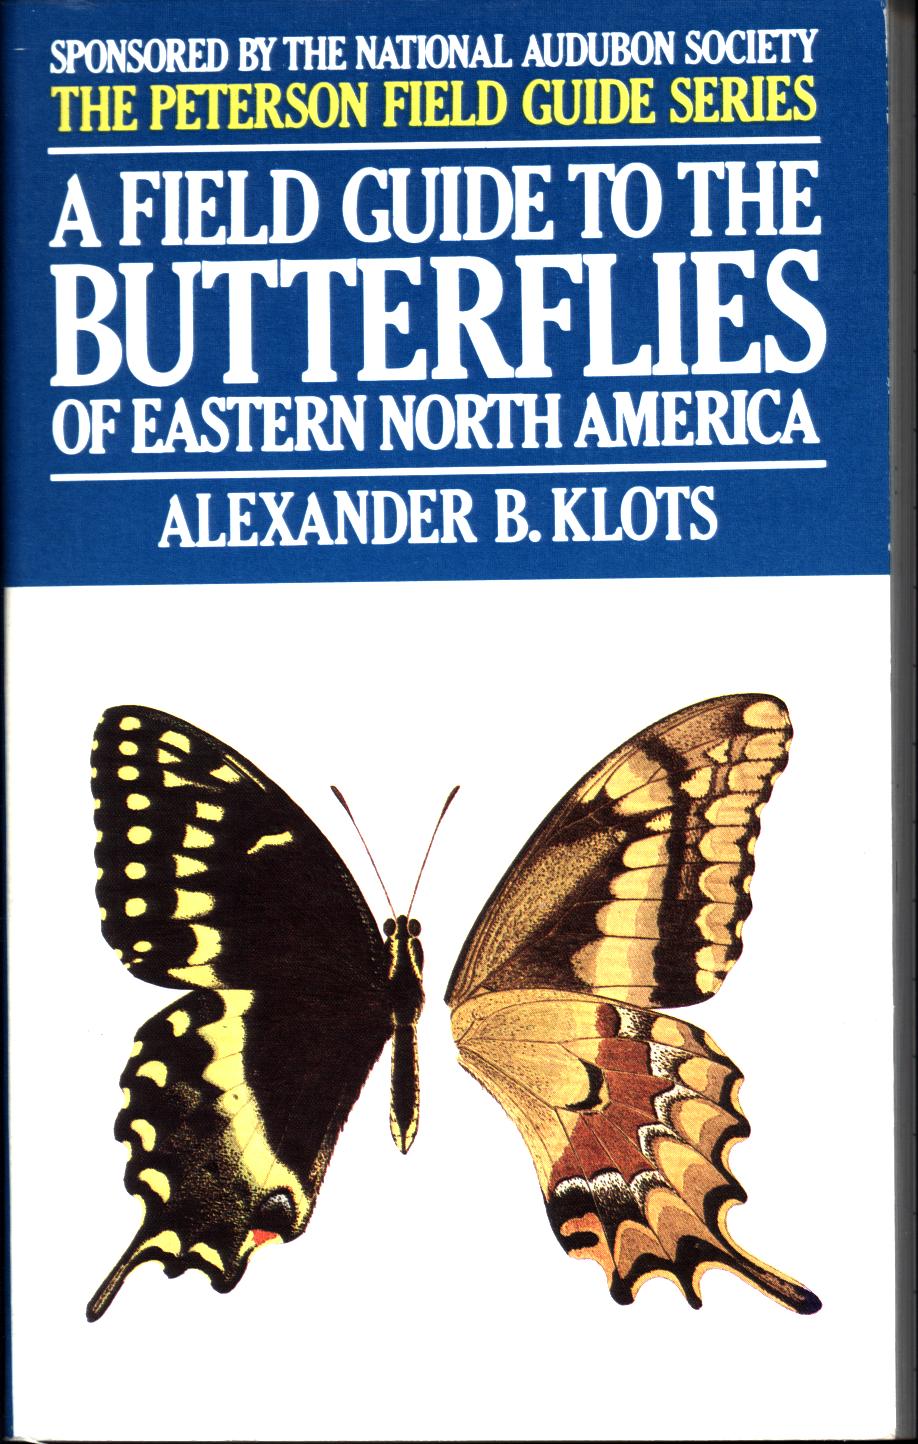 A FIELD GUIDE TO THE BUTTERFLIES OF EASTERN NORTH AMERICA